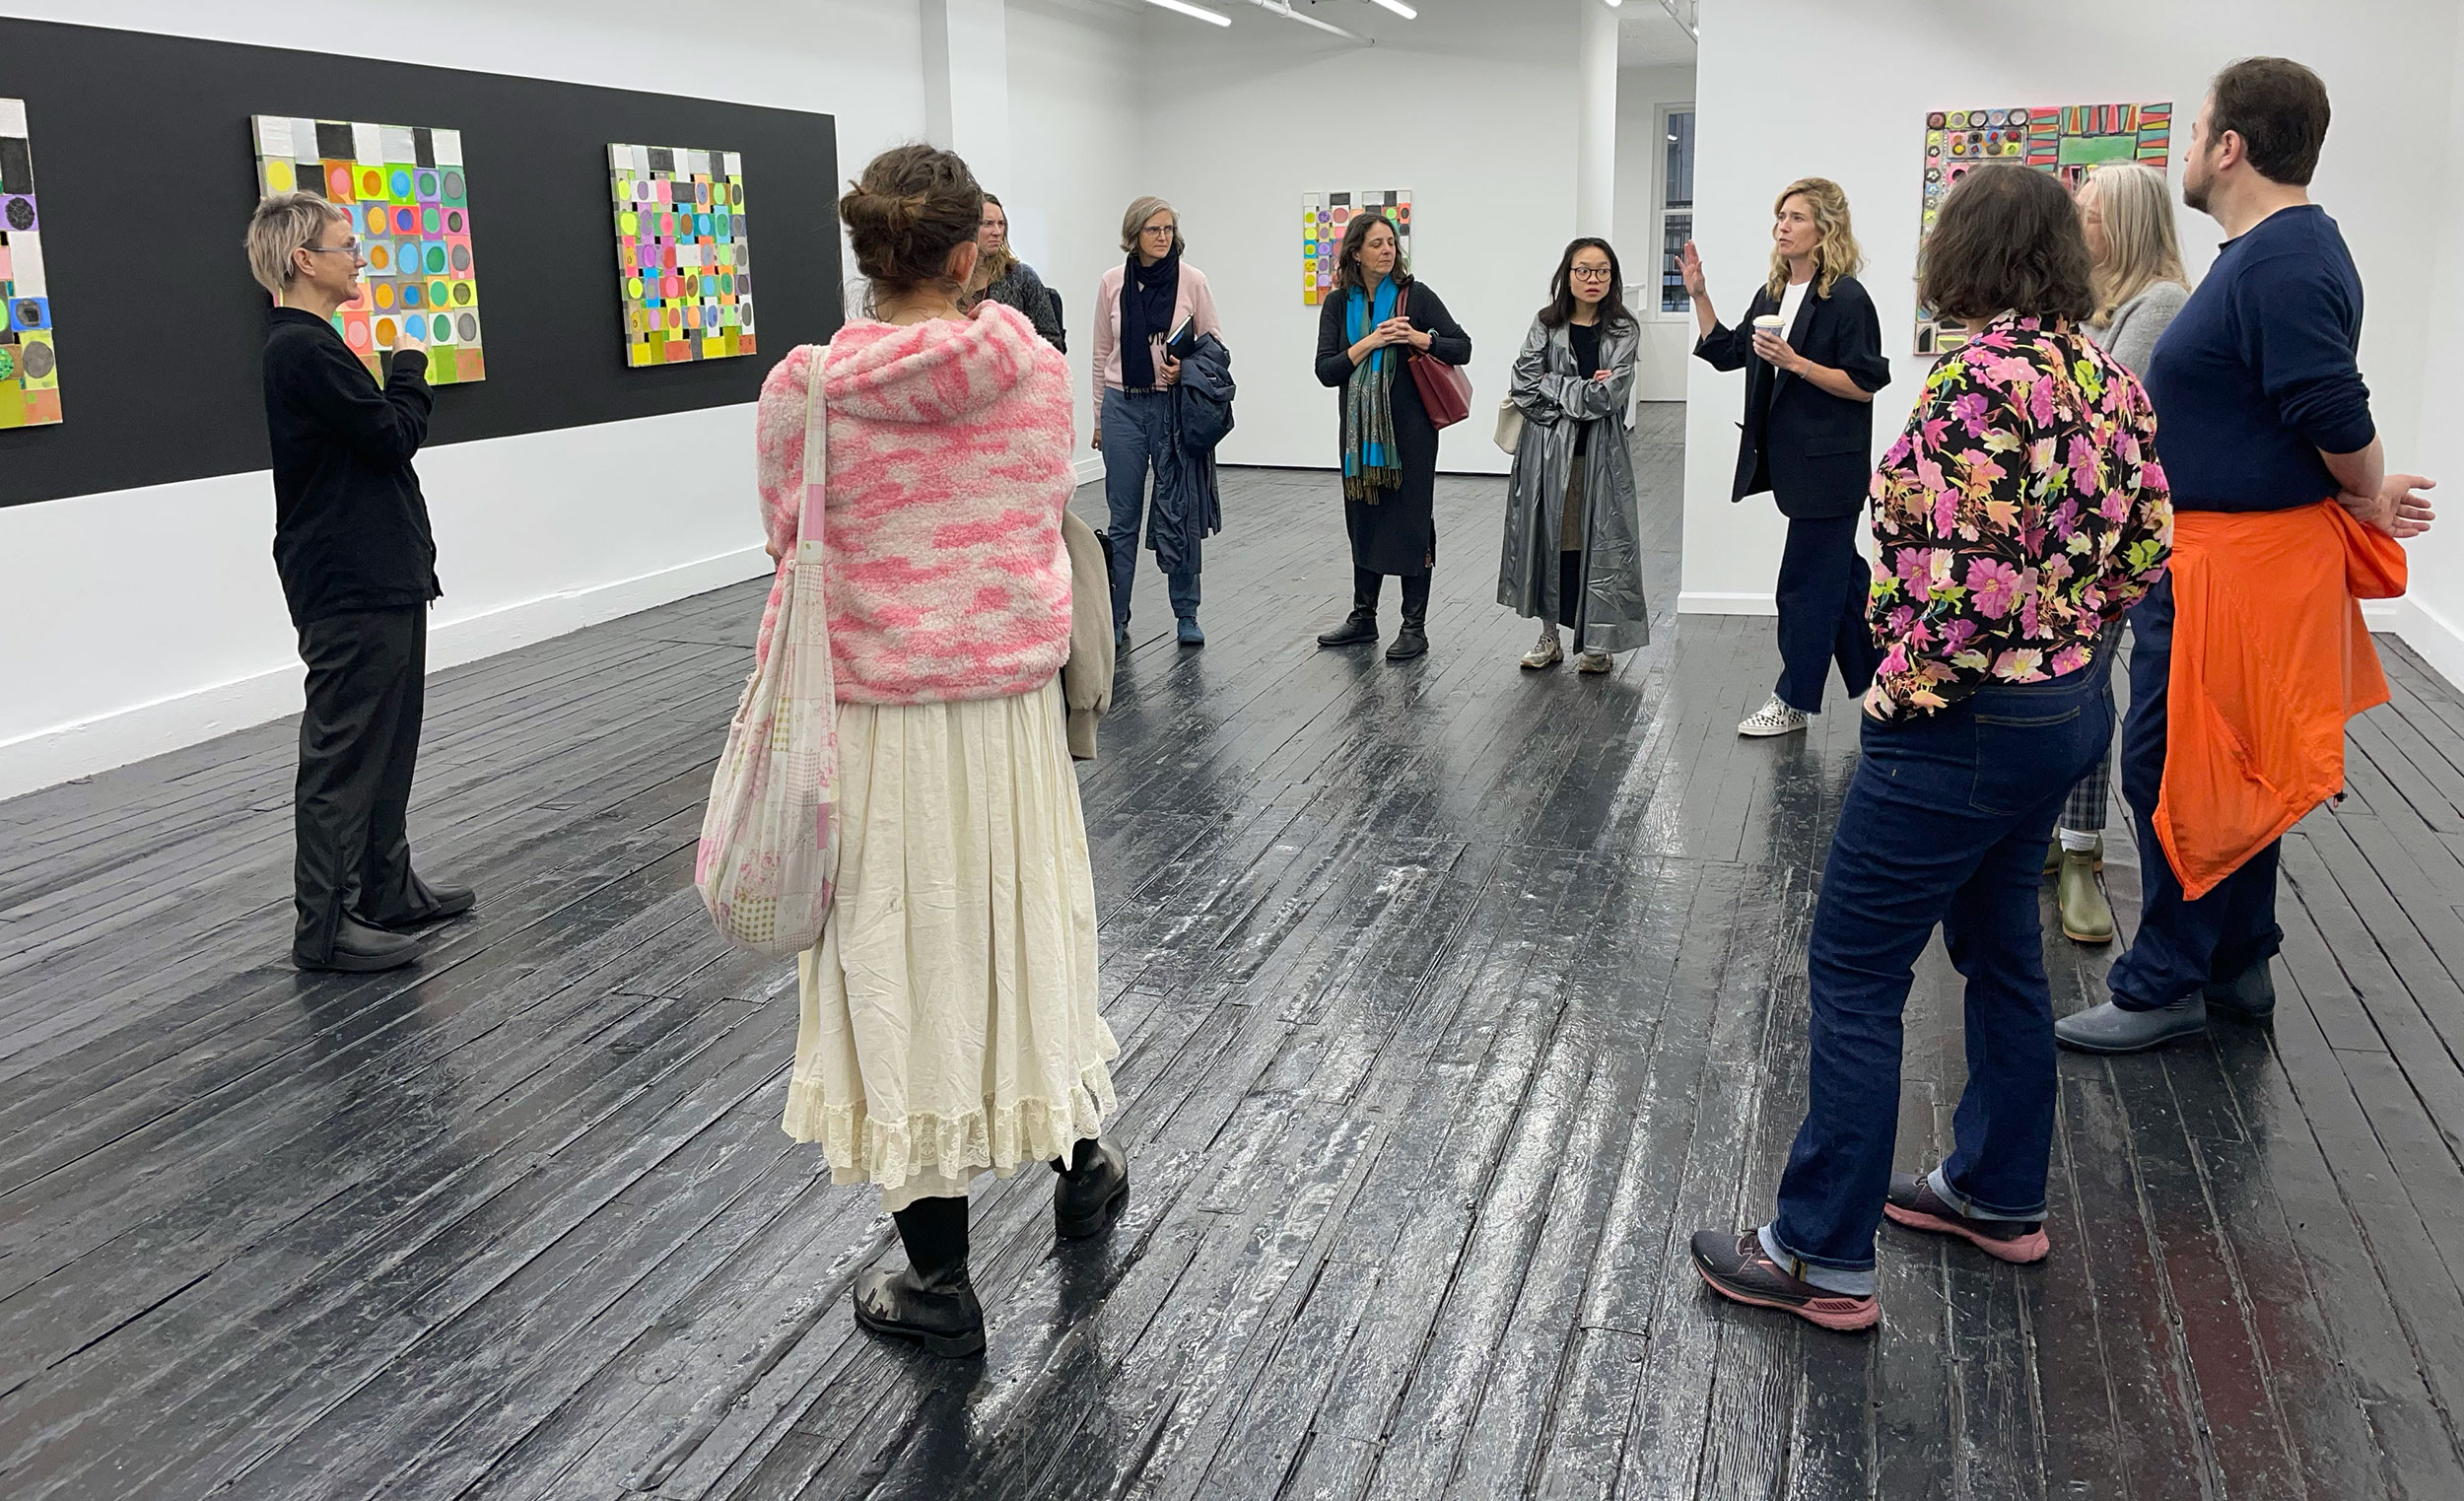 MFA students talking with gallerist in New York City